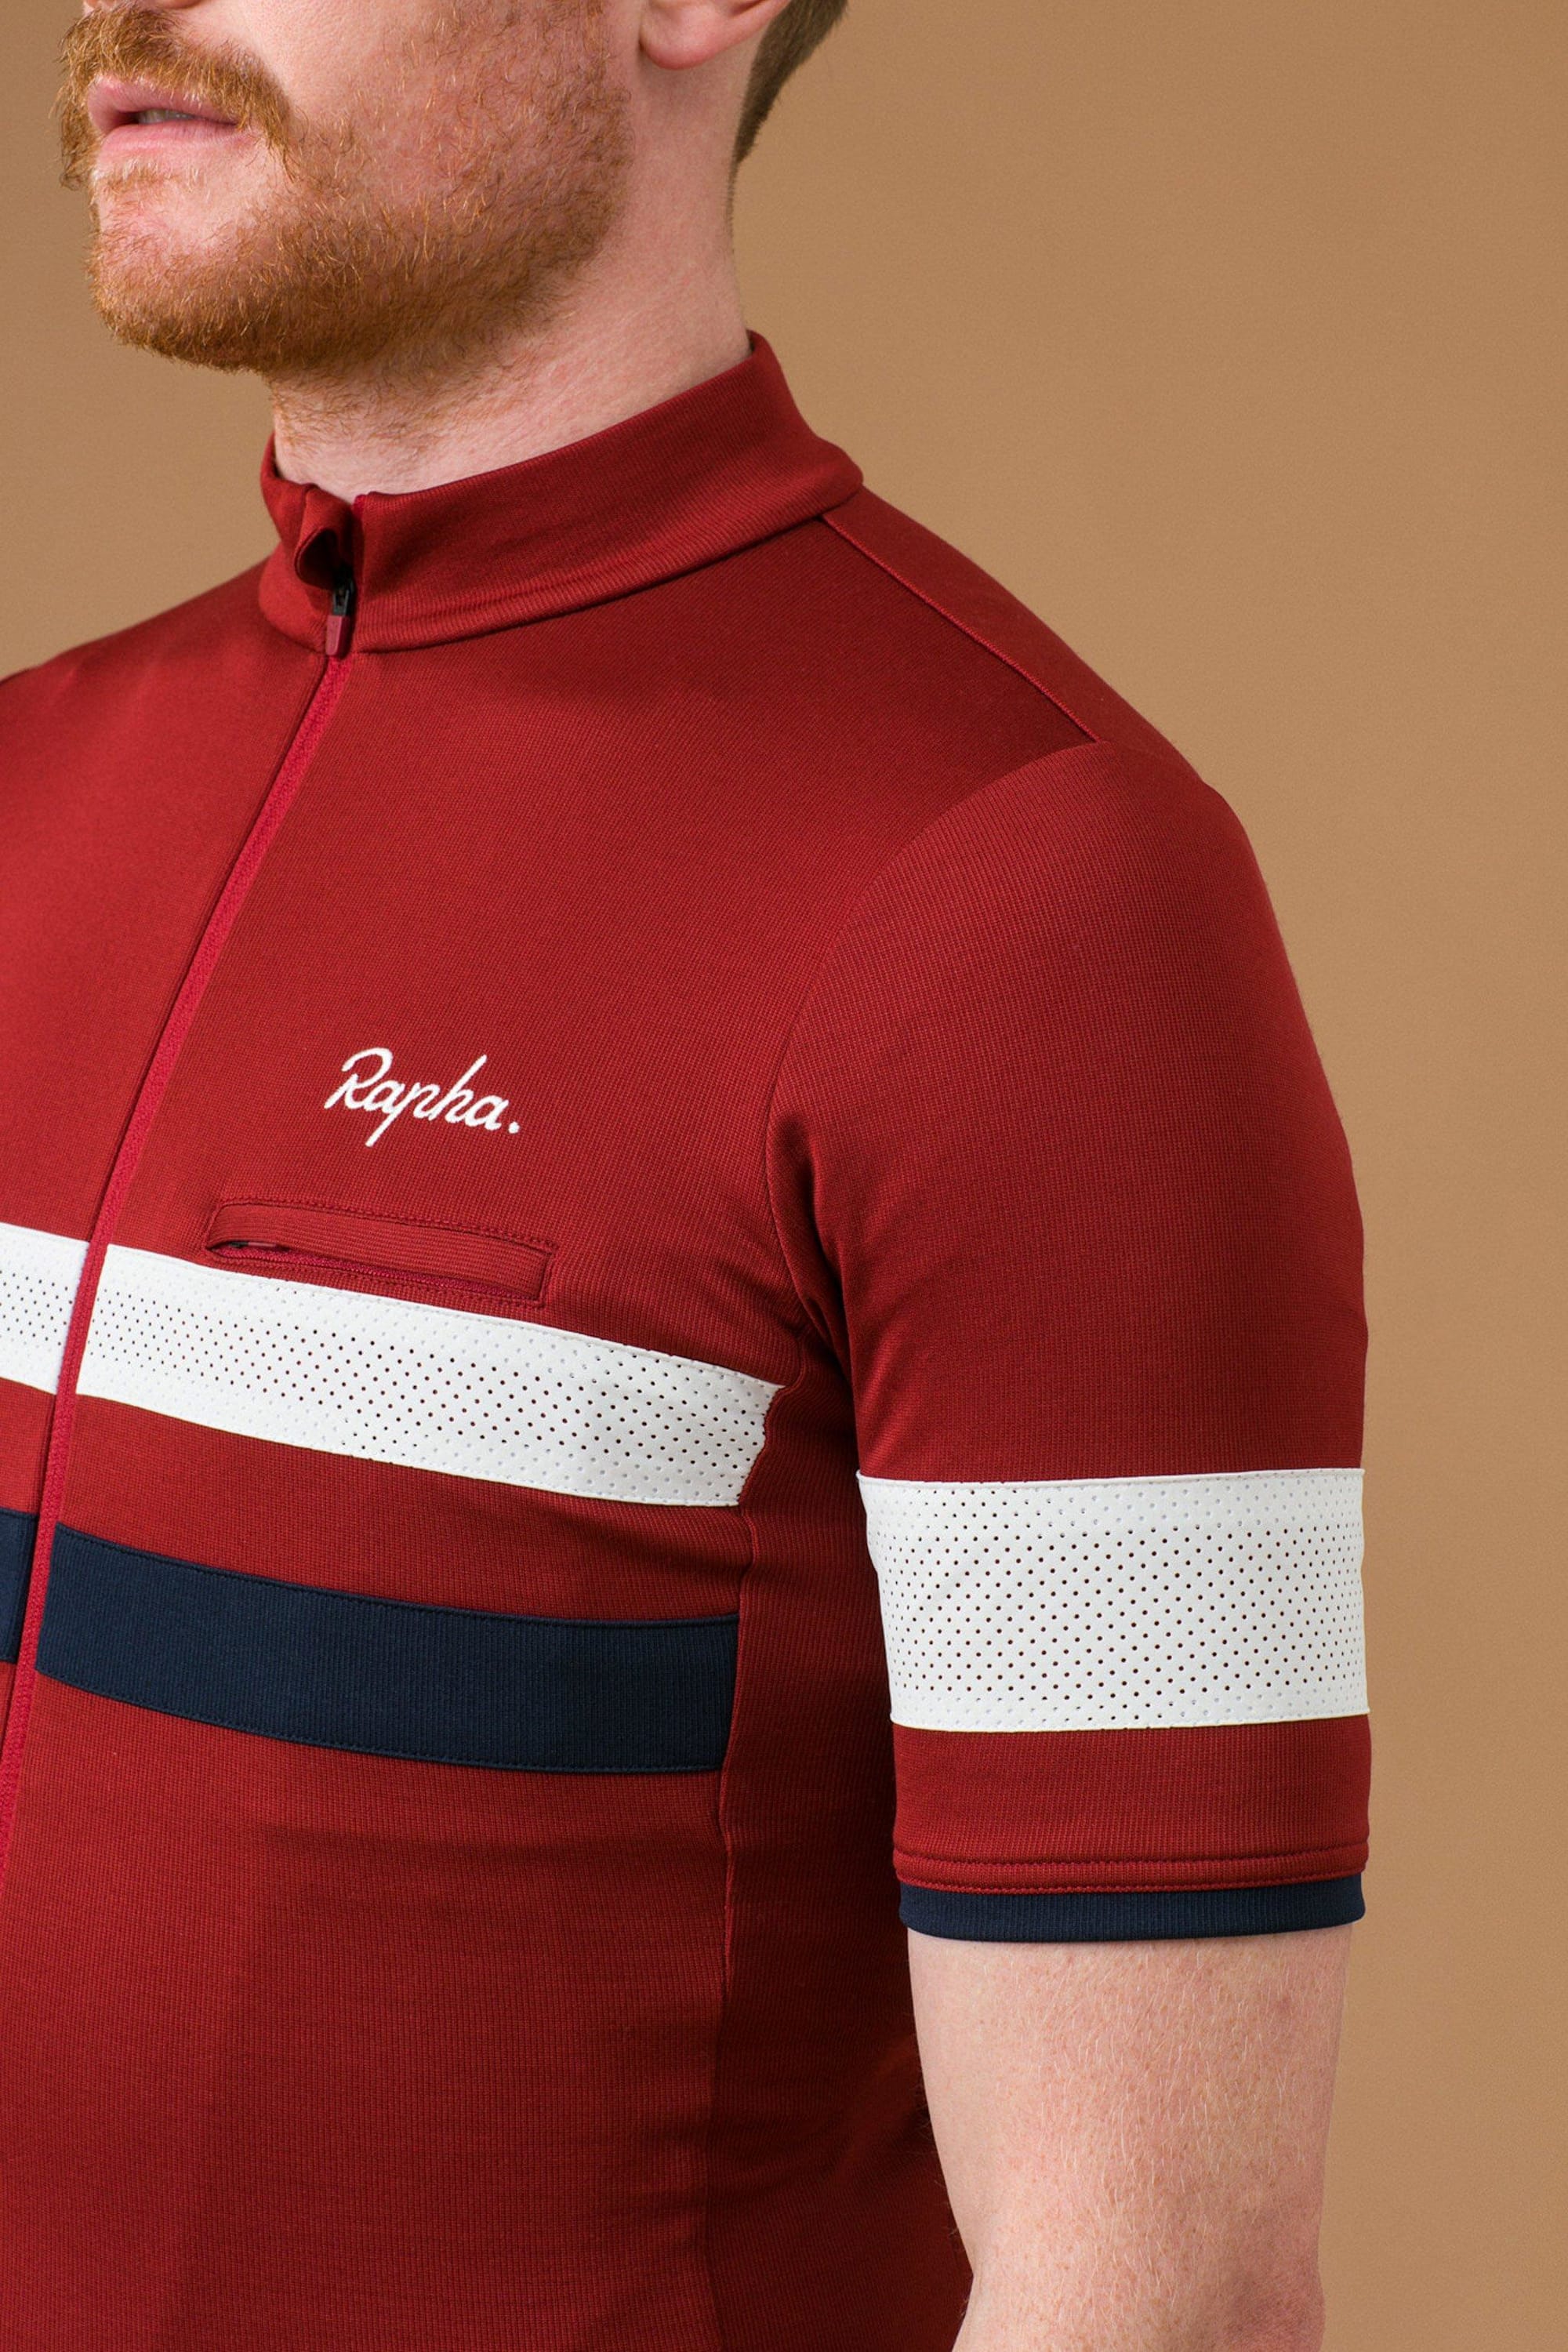 Rapha Brevet Collection mens cycling jerseys merino cycling jersey